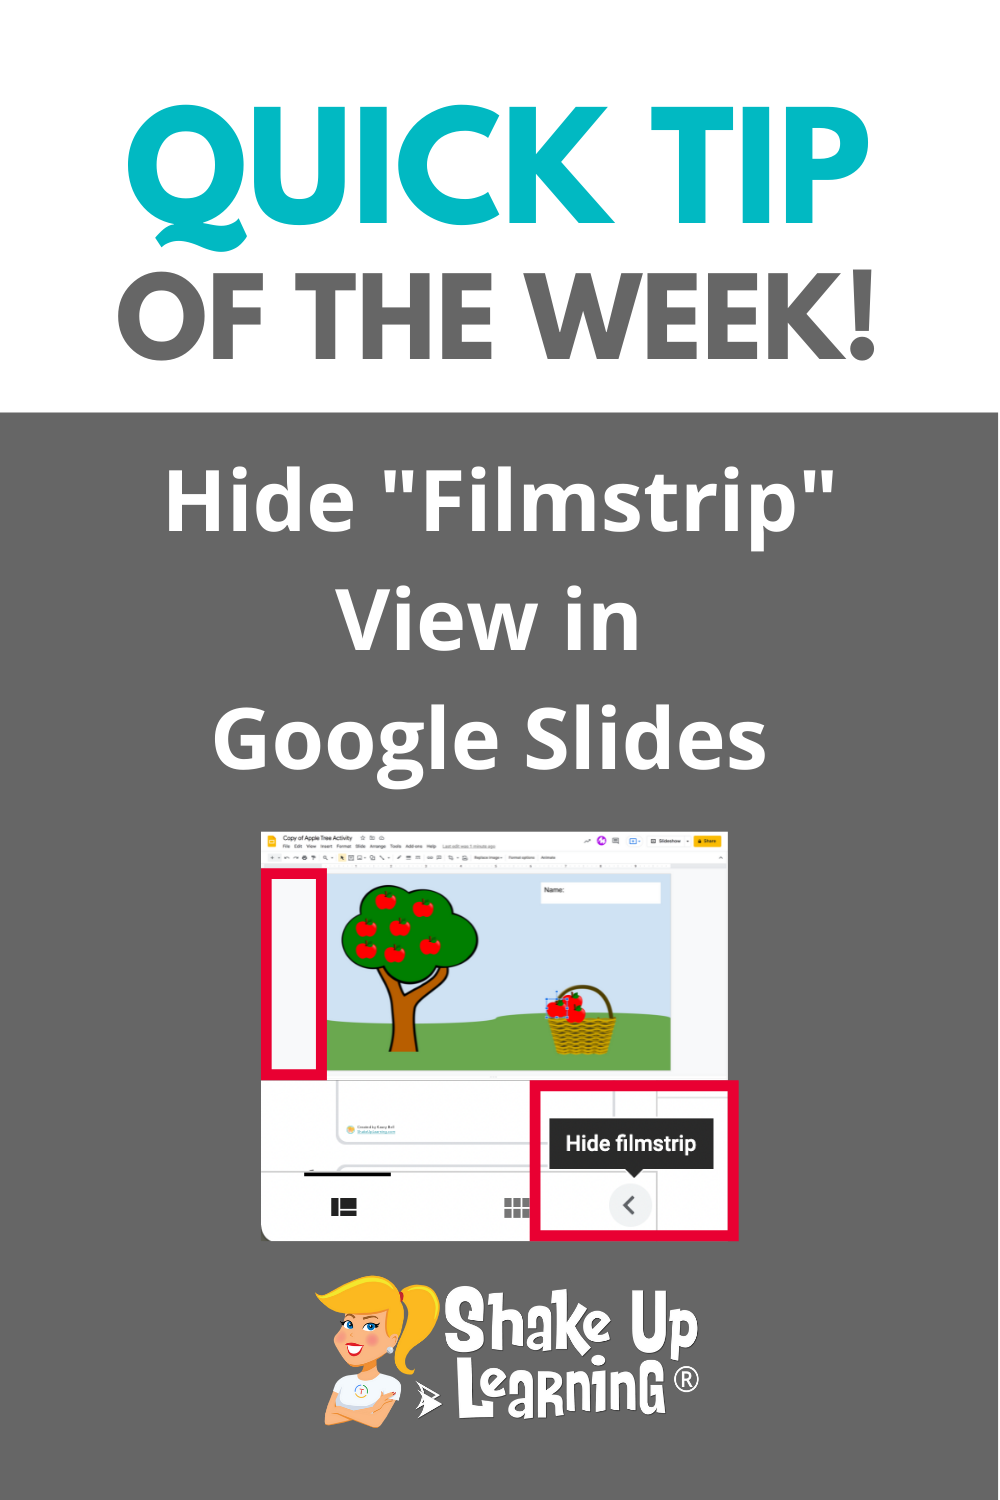 View ONE Slide at a Time in Google Slides (Hide Filmstrip View)